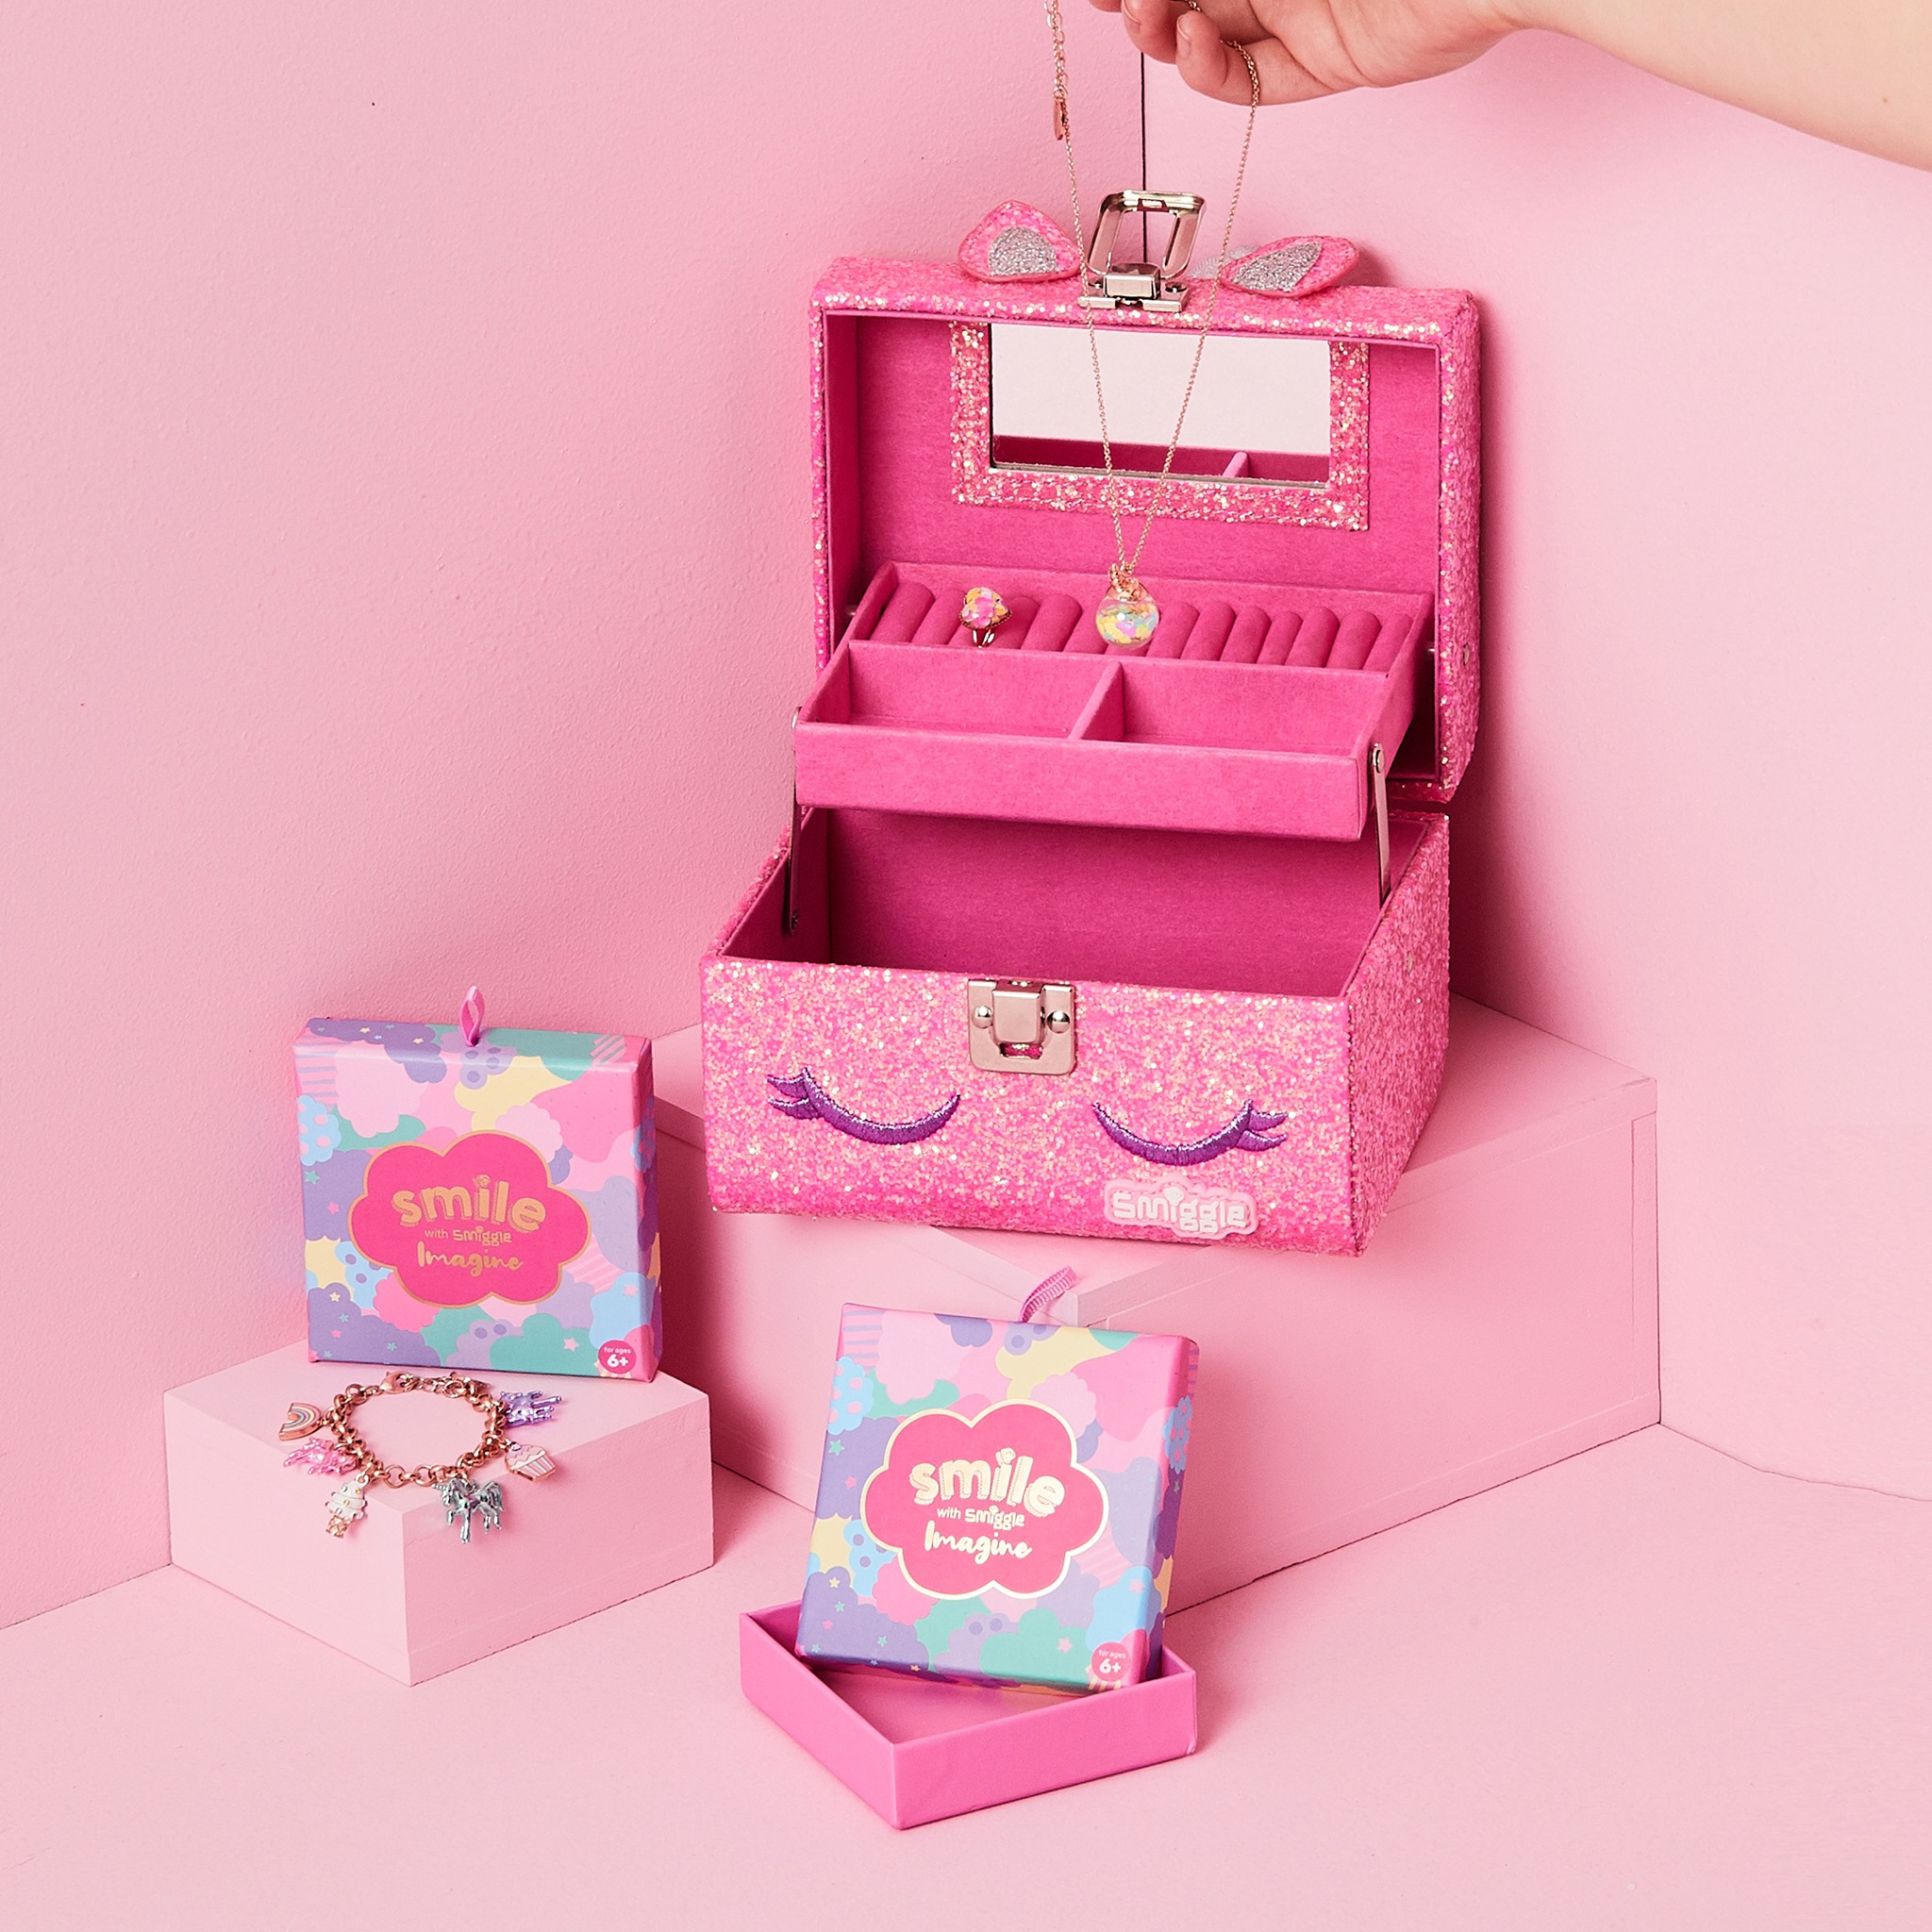 Keep your jewellery safe in our unicorn 🦄 jewellery box! Shop our accessories instore now 